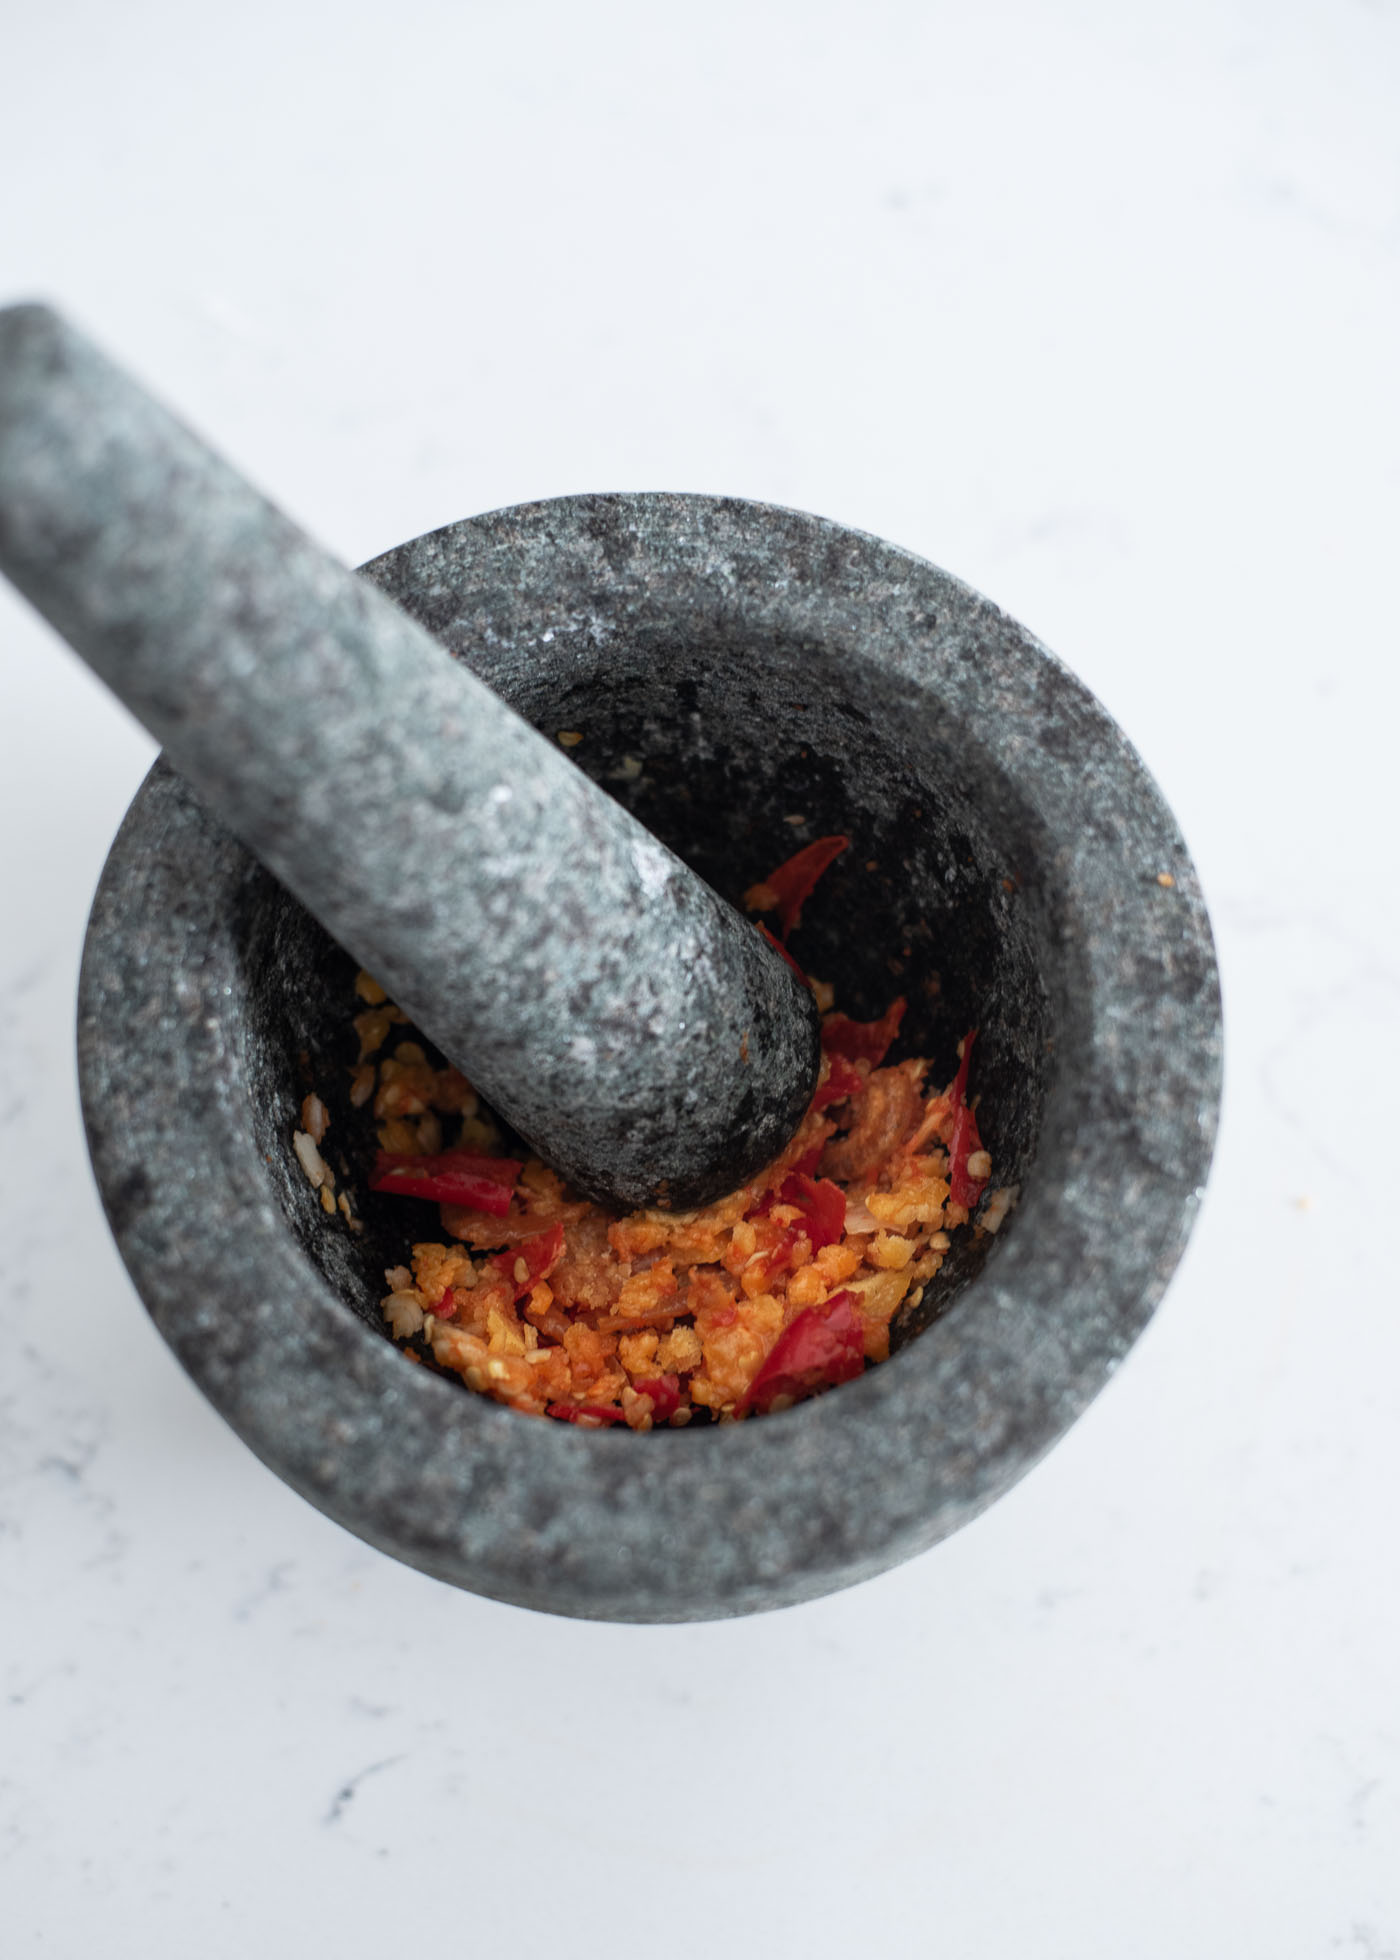 Garlic and red chili are pounded in a mortar with pestle